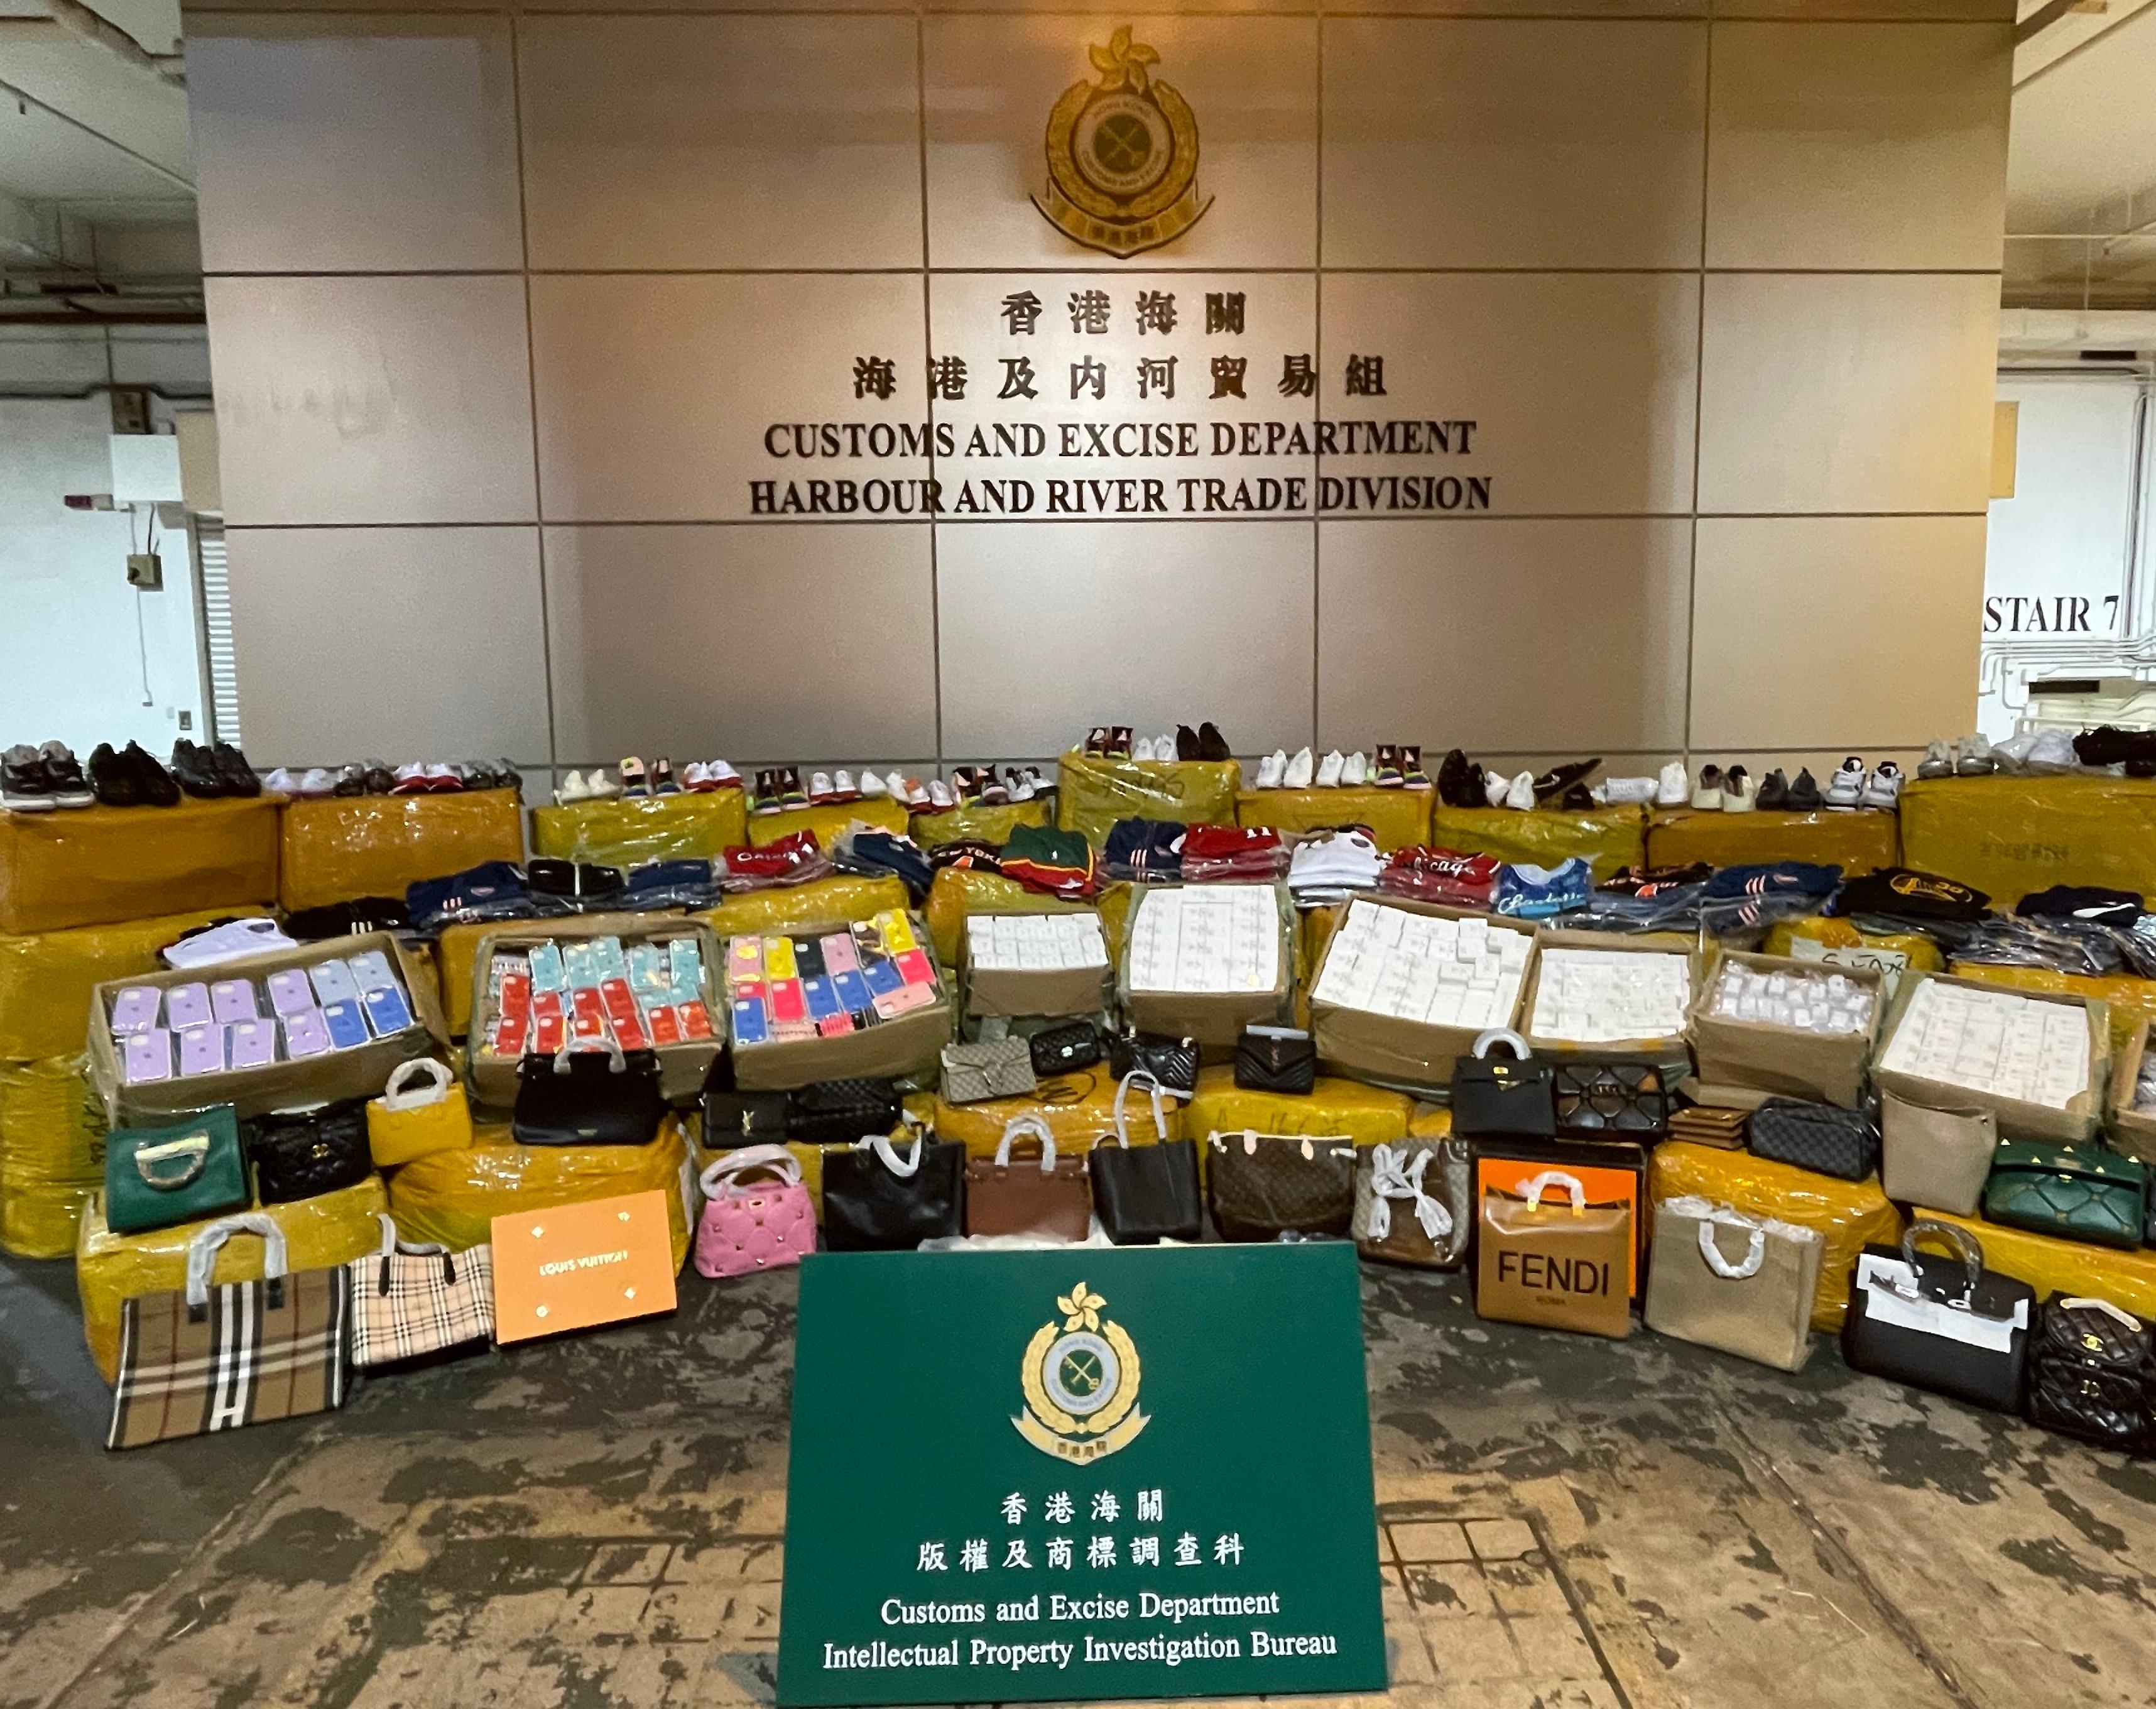 Hong Kong Customs on February 16 detected a counterfeit goods smuggling case at the Customs Cargo Examination Compound, River Trade Terminal, Tuen Mun, and seized about 31 000 items of goods suspected to be involved in the case with an estimated market value of about $2 million. Photo shows some of the suspected counterfeit and smuggled goods seized.